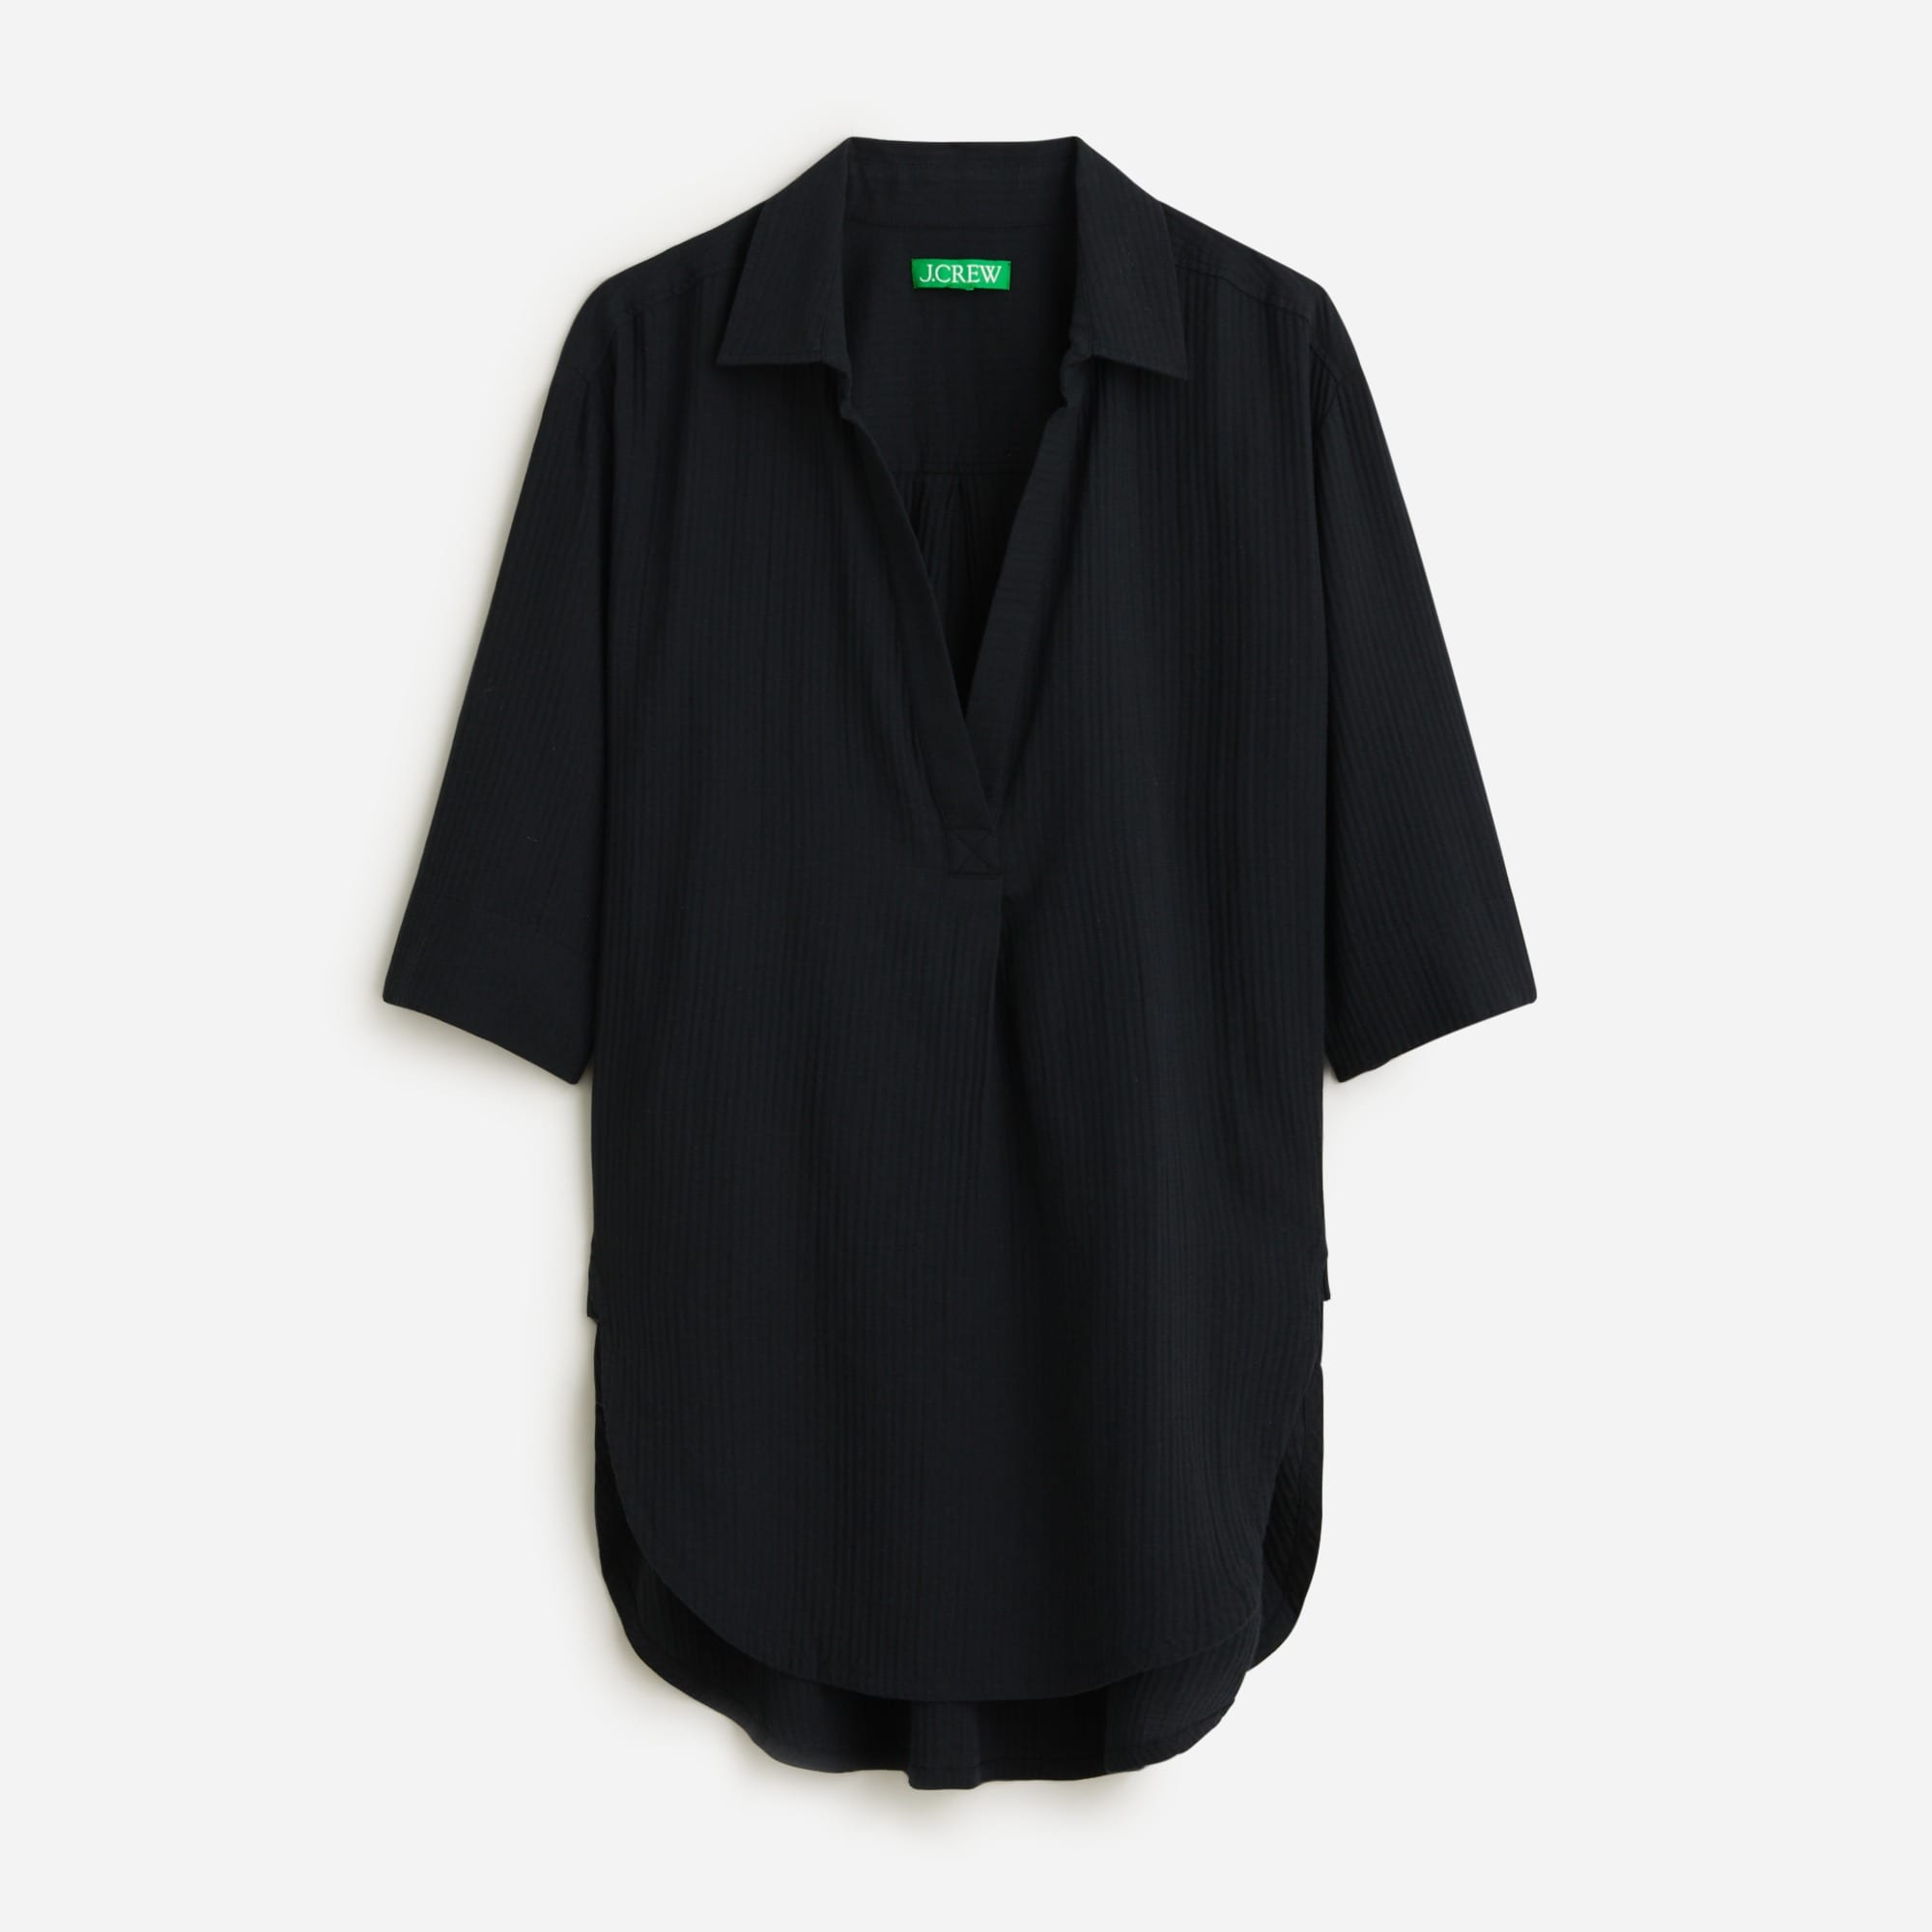  Popover shirt in airy gauze